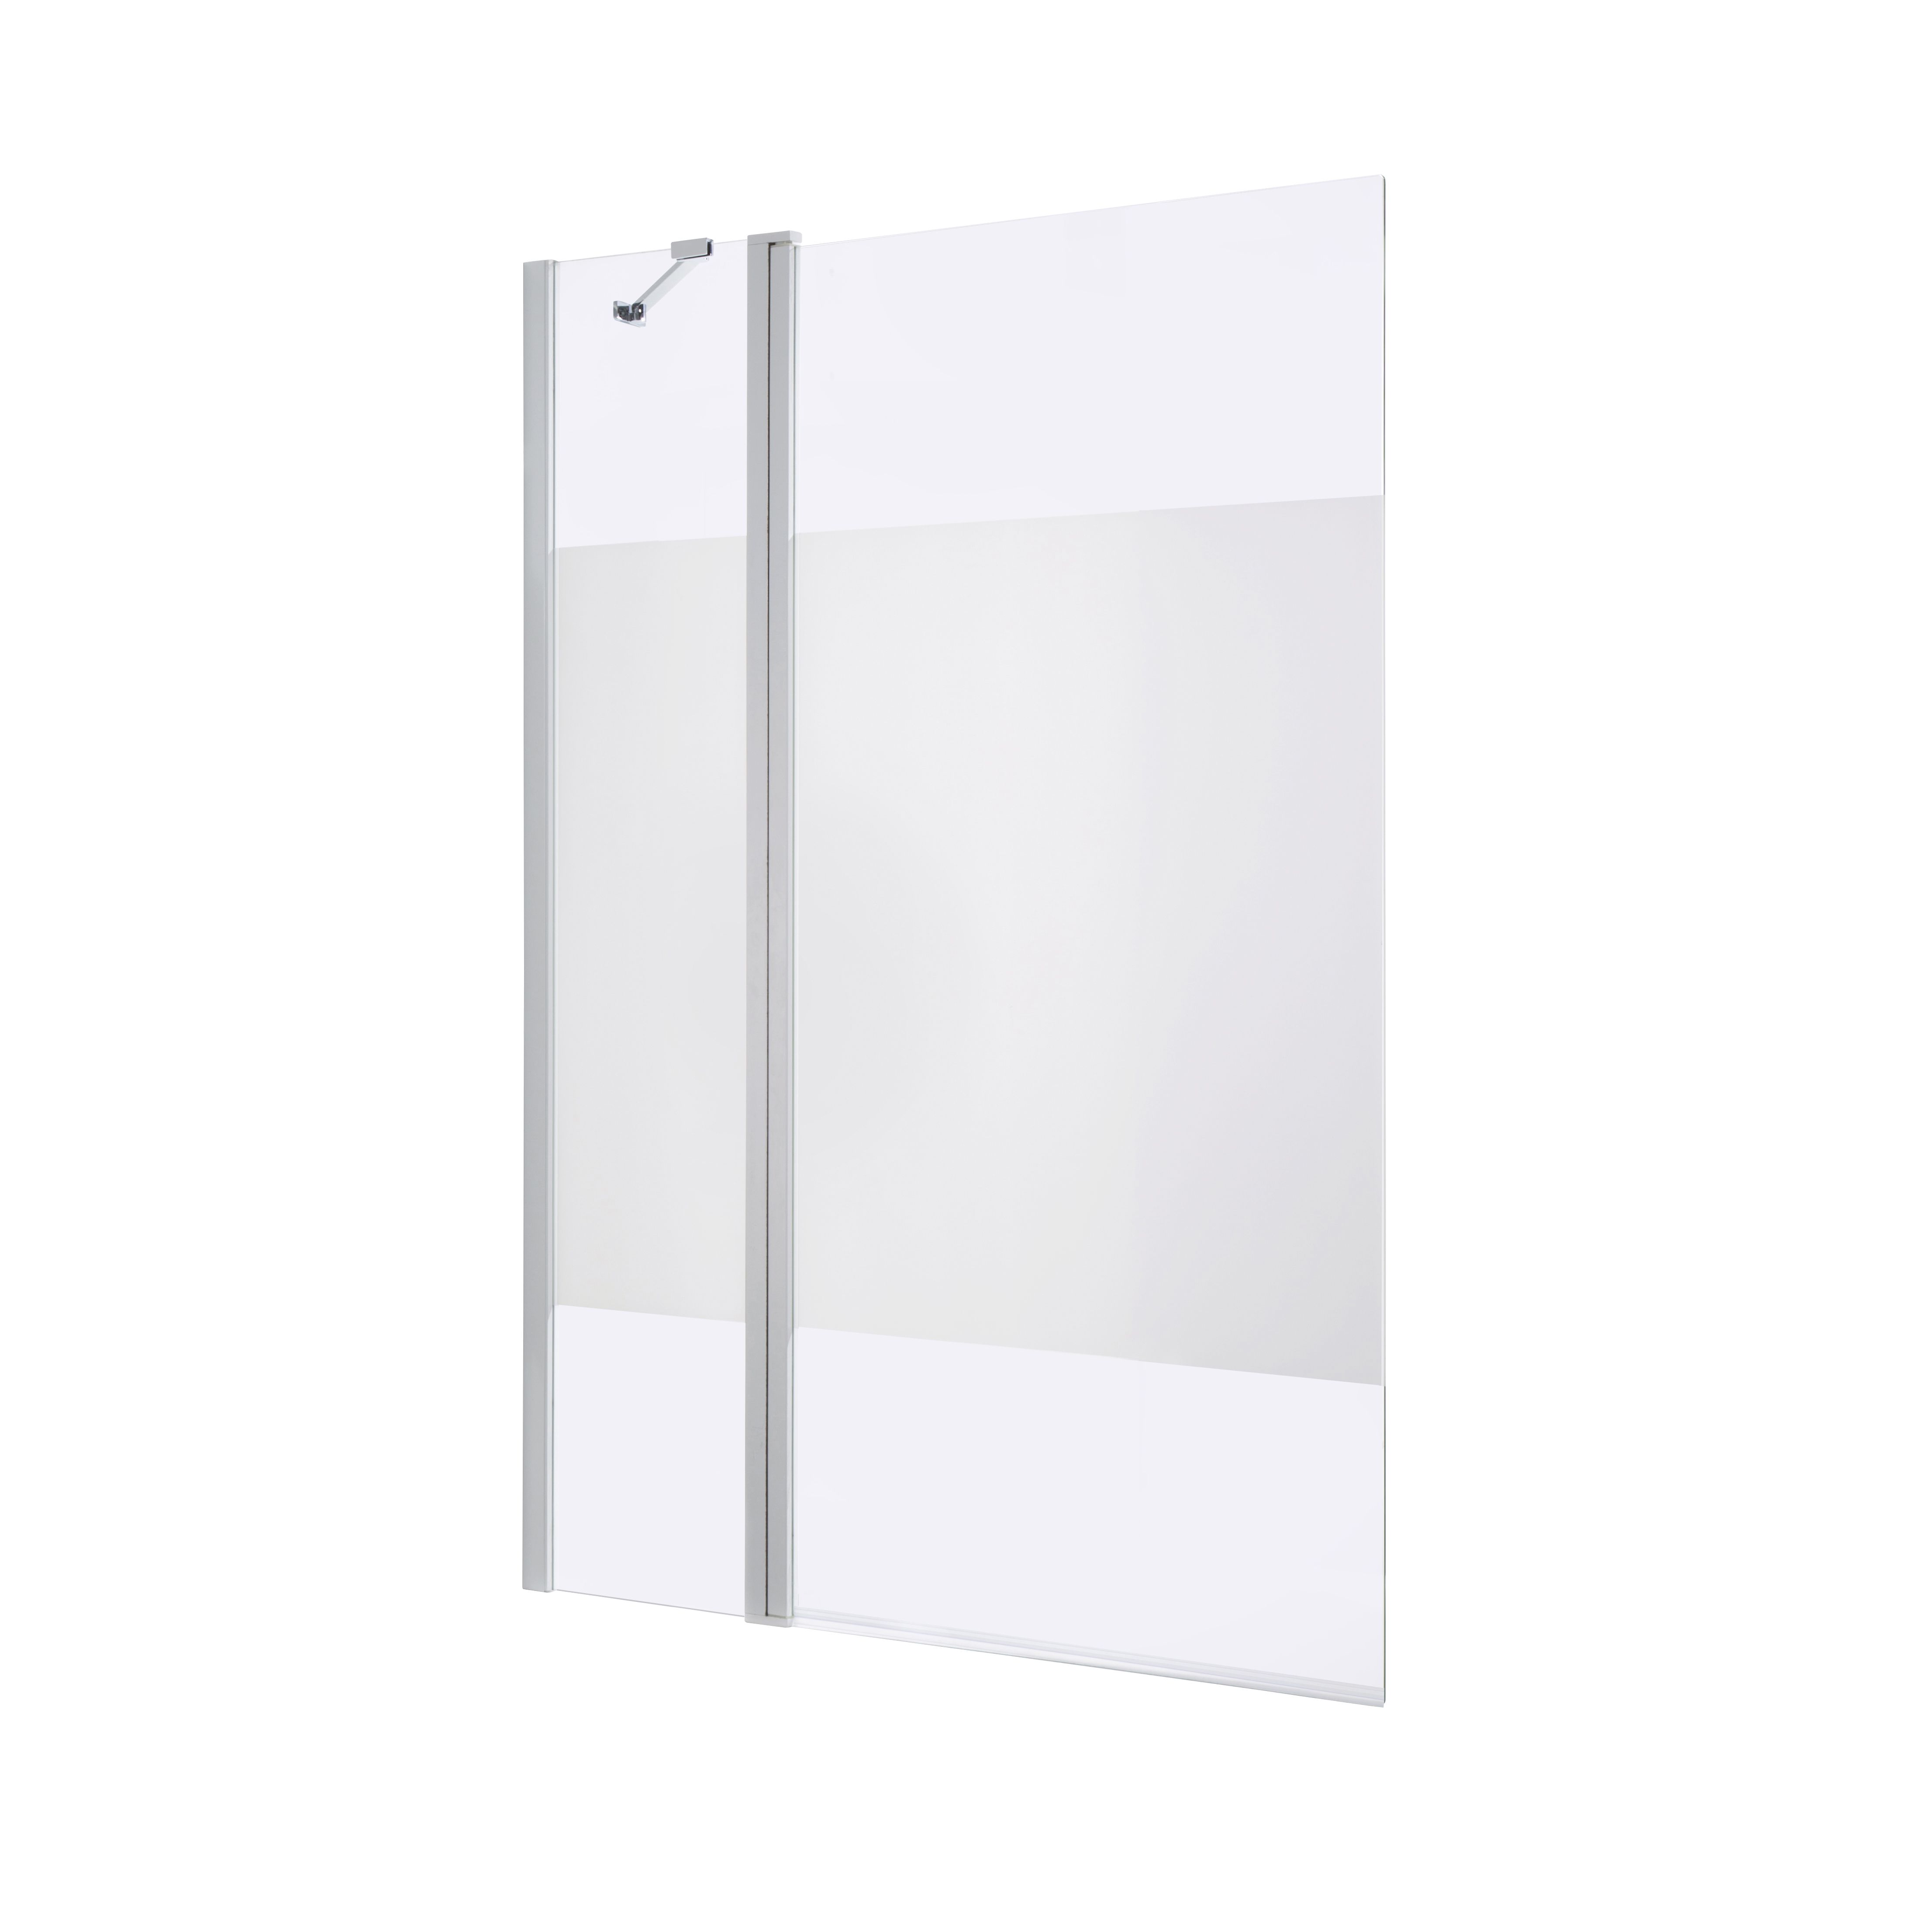 GoodHome Calera Straight 2 panel Frosted Chrome effect frame Bath screen, (H)140cm (W)1040mm